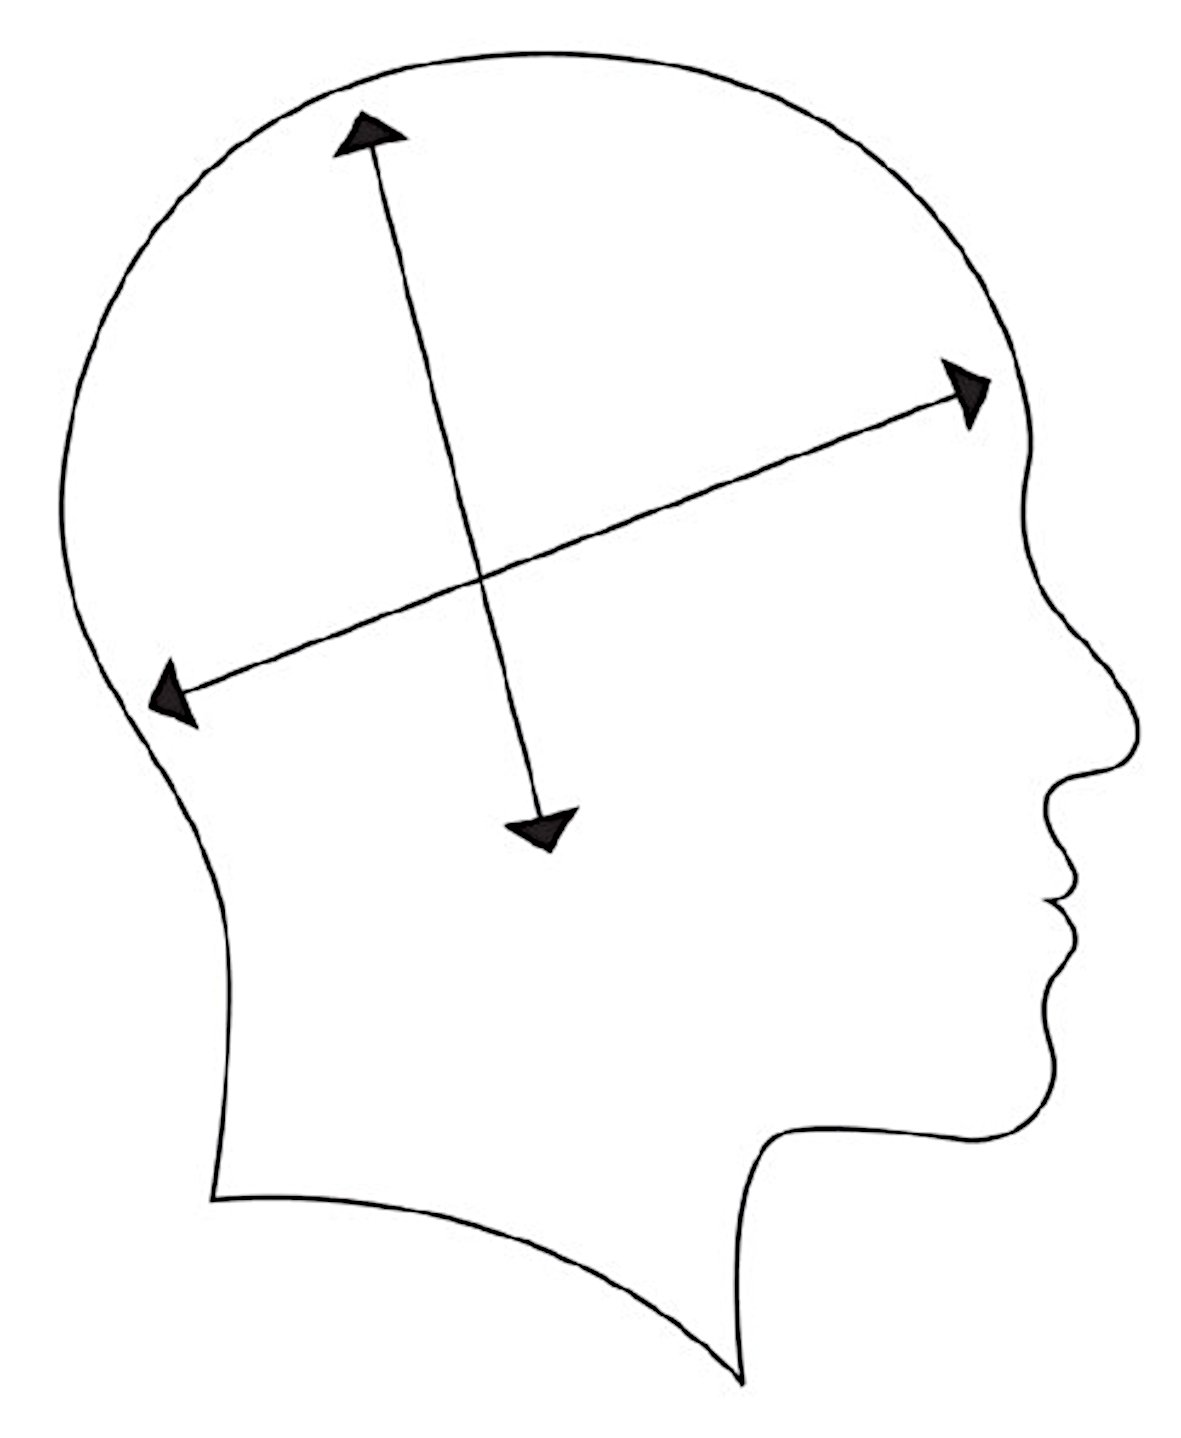 Head size chart for knitting hats - Knitgrammer